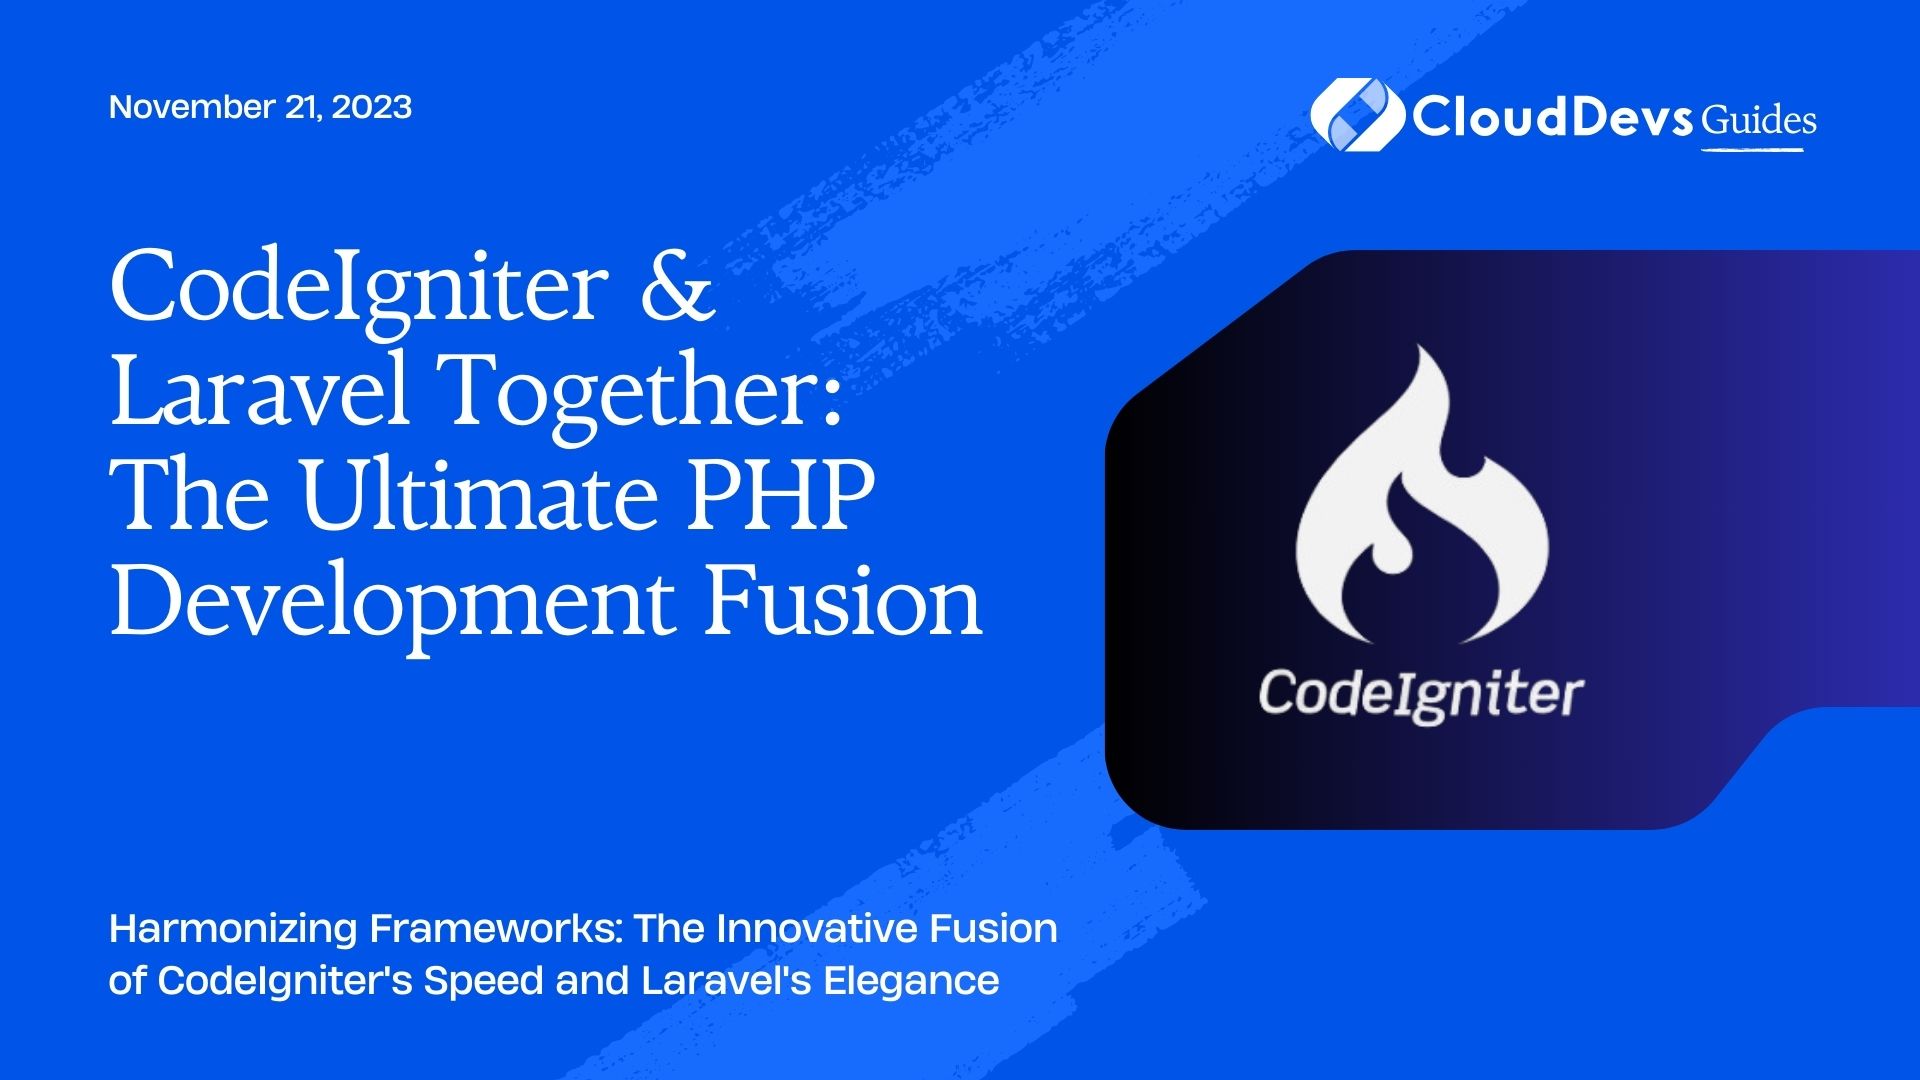 CodeIgniter & Laravel Together: The Ultimate PHP Development Fusion